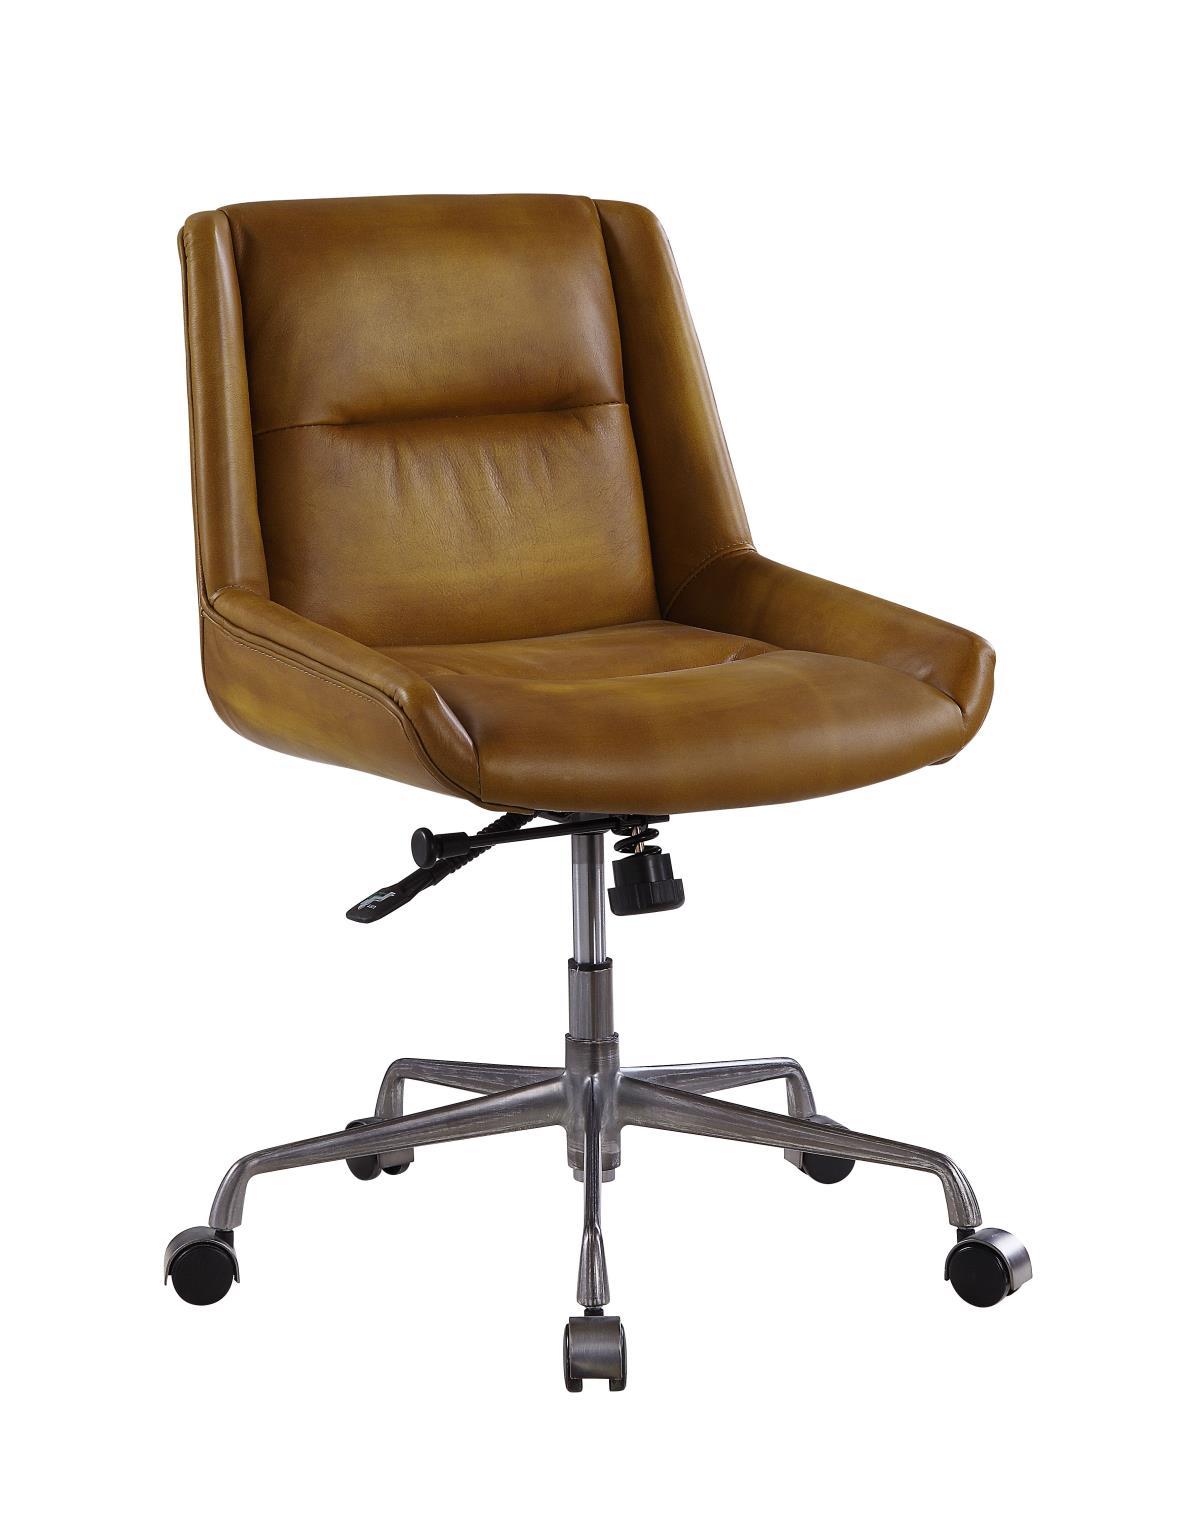 Contemporary, Modern Executive Chair Ambler Ambler 92499 in Saddle, Brown Top grain leather